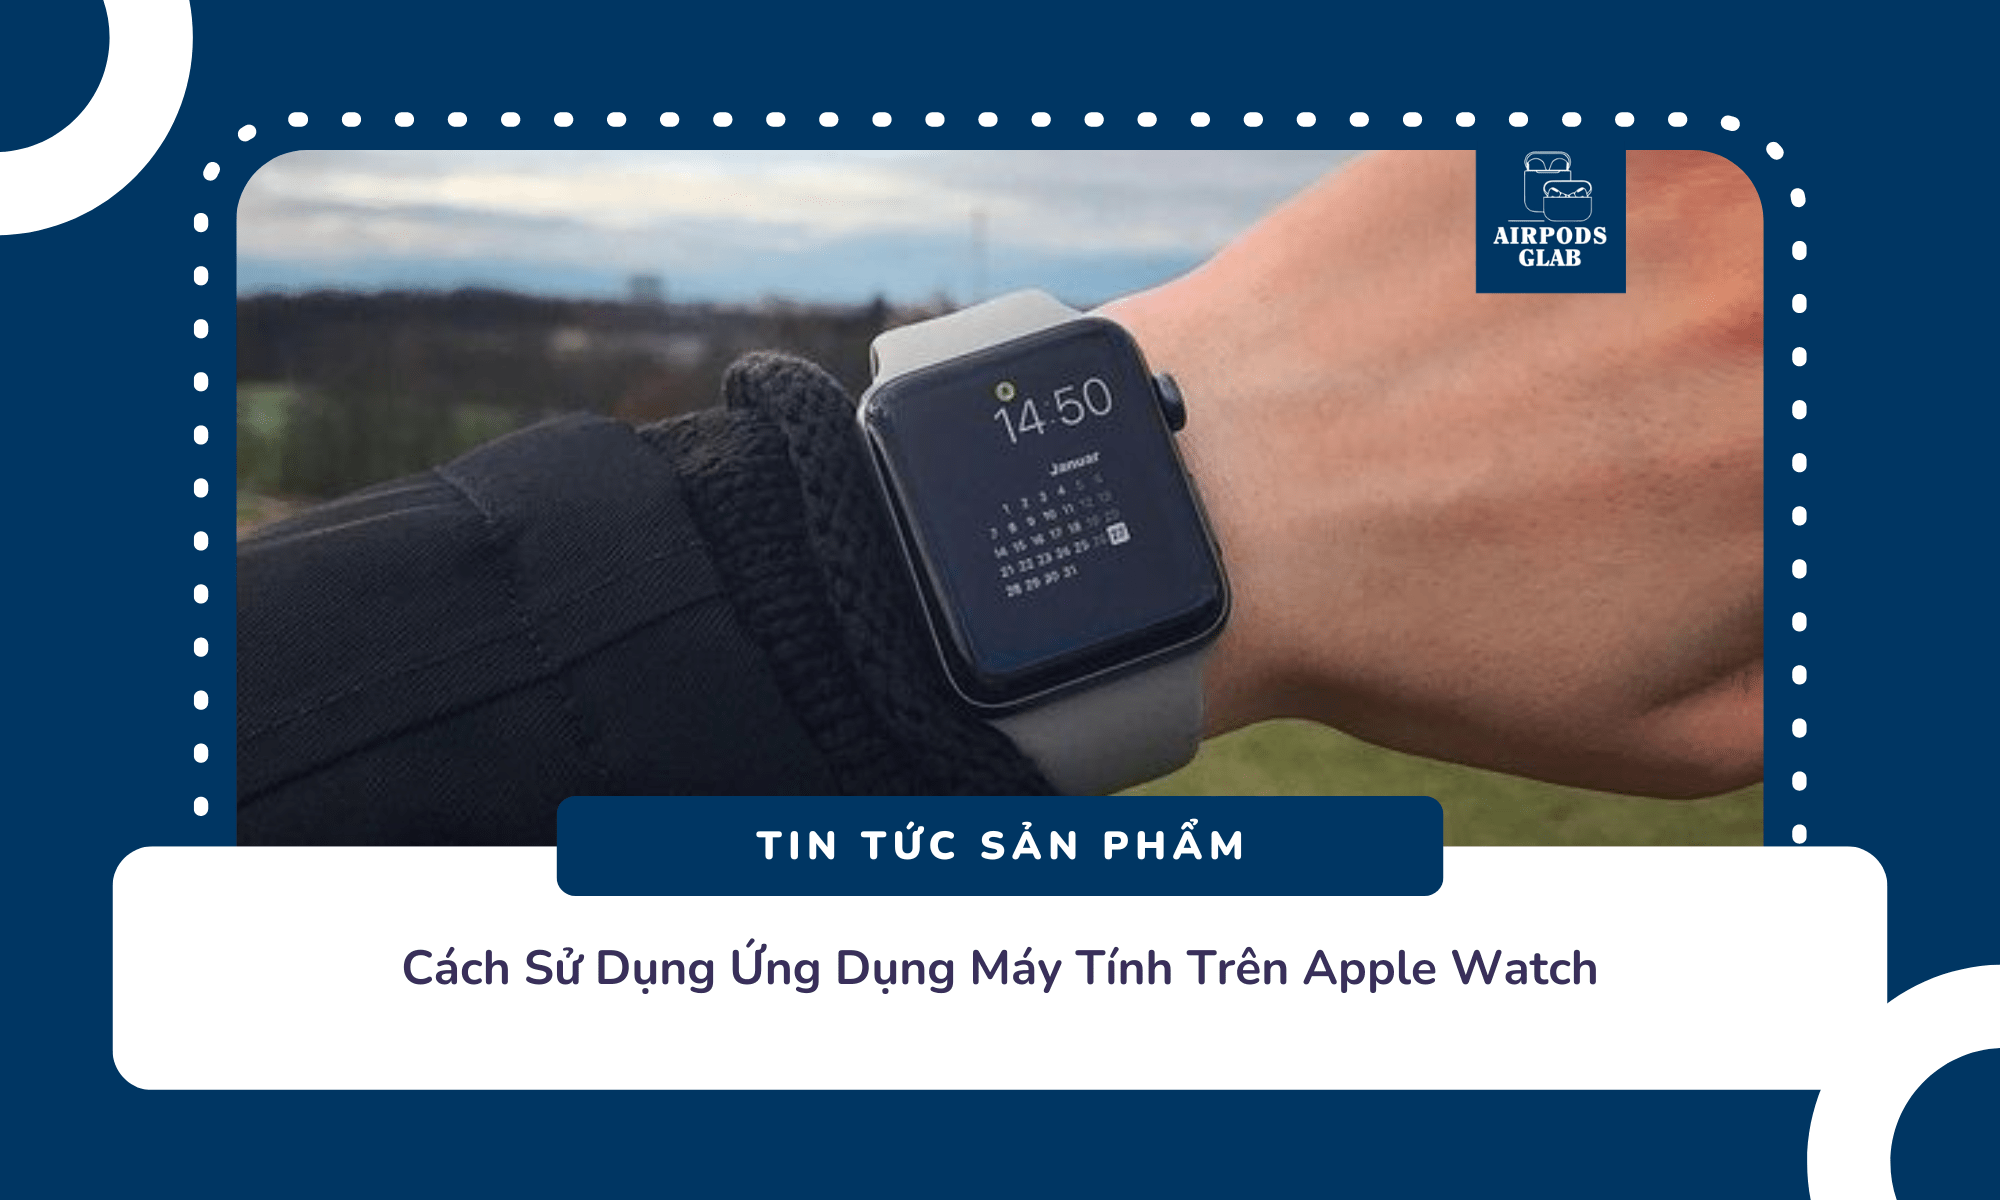 ung-dung-may-tinh-tren-apple-watch